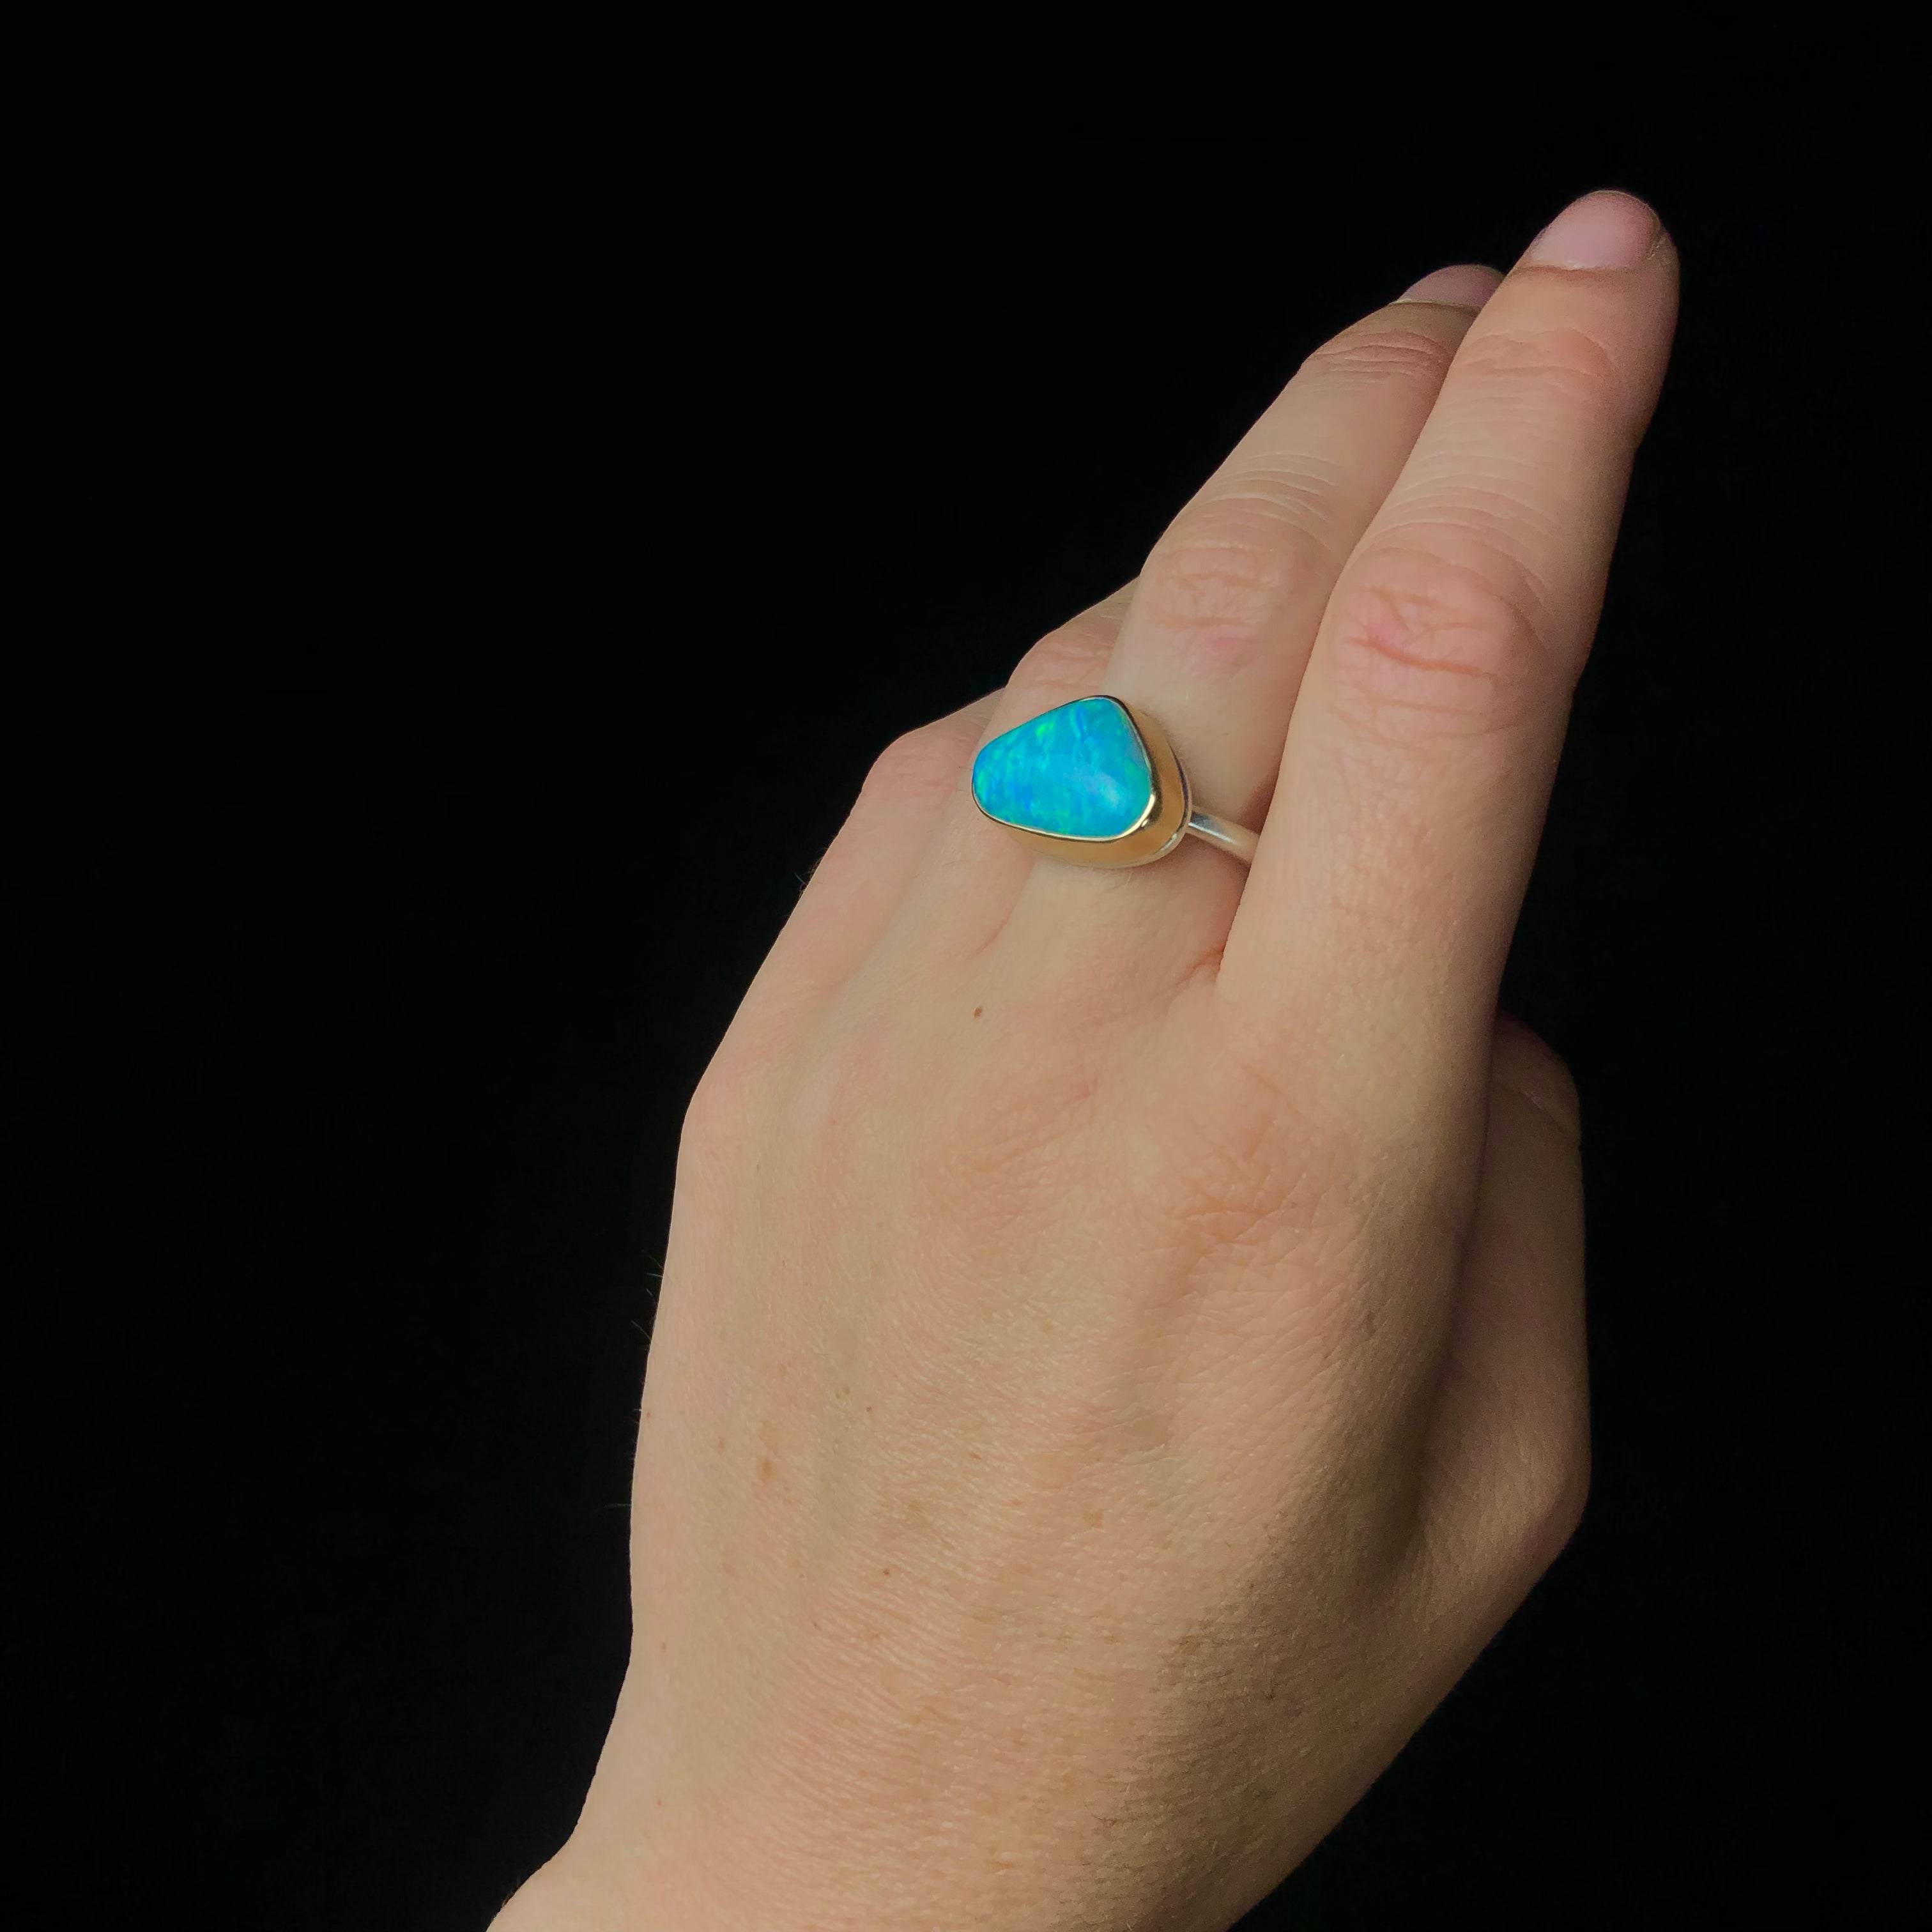 Side view with gold set green and blue opal stone mounted on silver band shown worn on hand